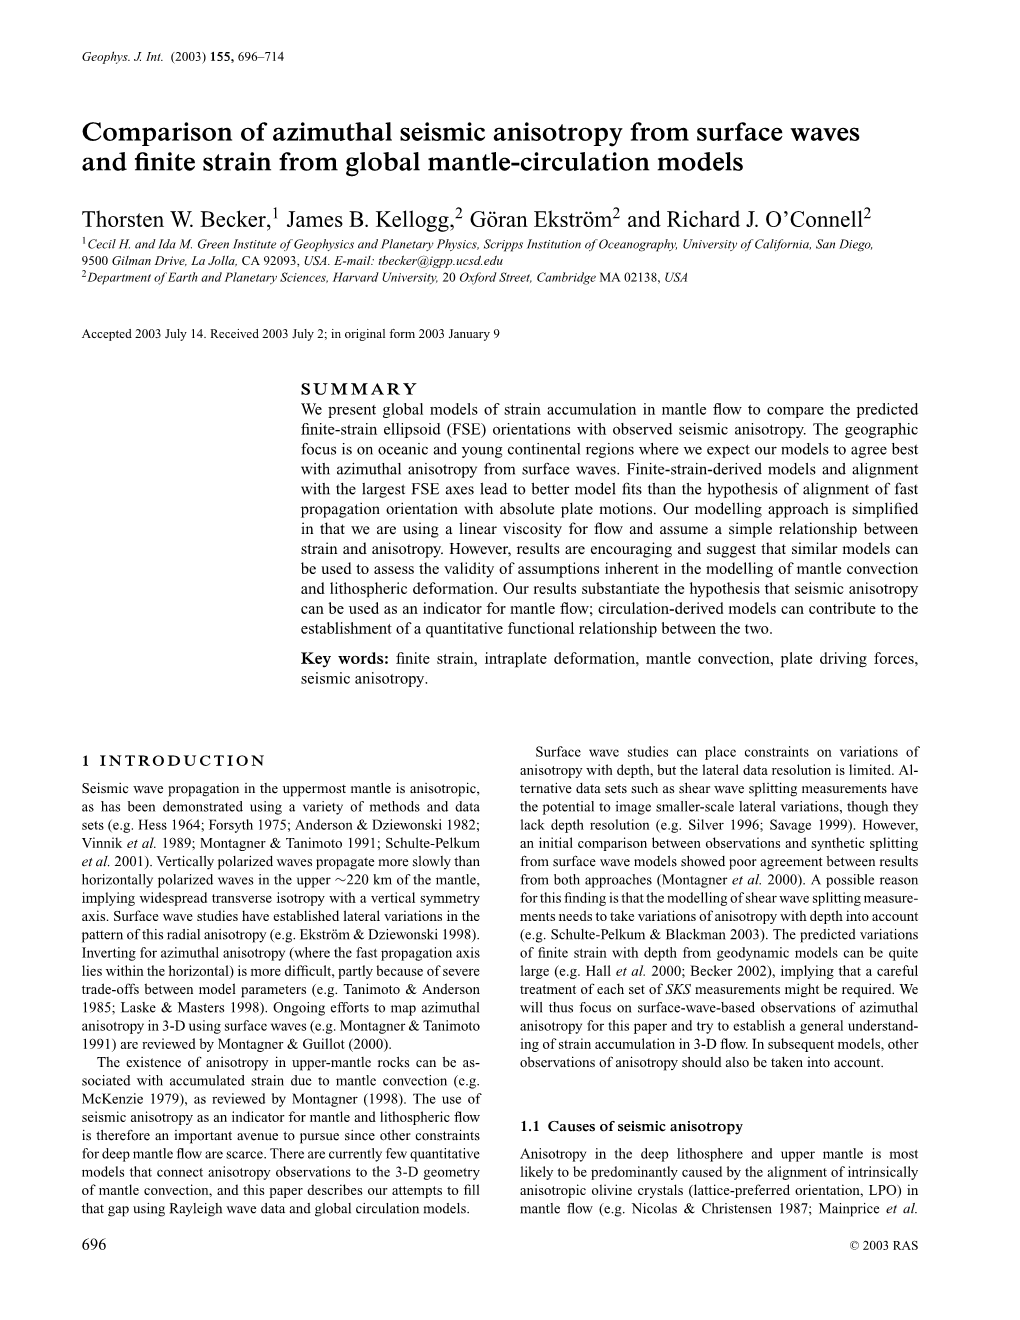 Comparison of Azimuthal Seismic Anisotropy from Surface Waves and Finite Strain from Global Mantle-Circulation Models